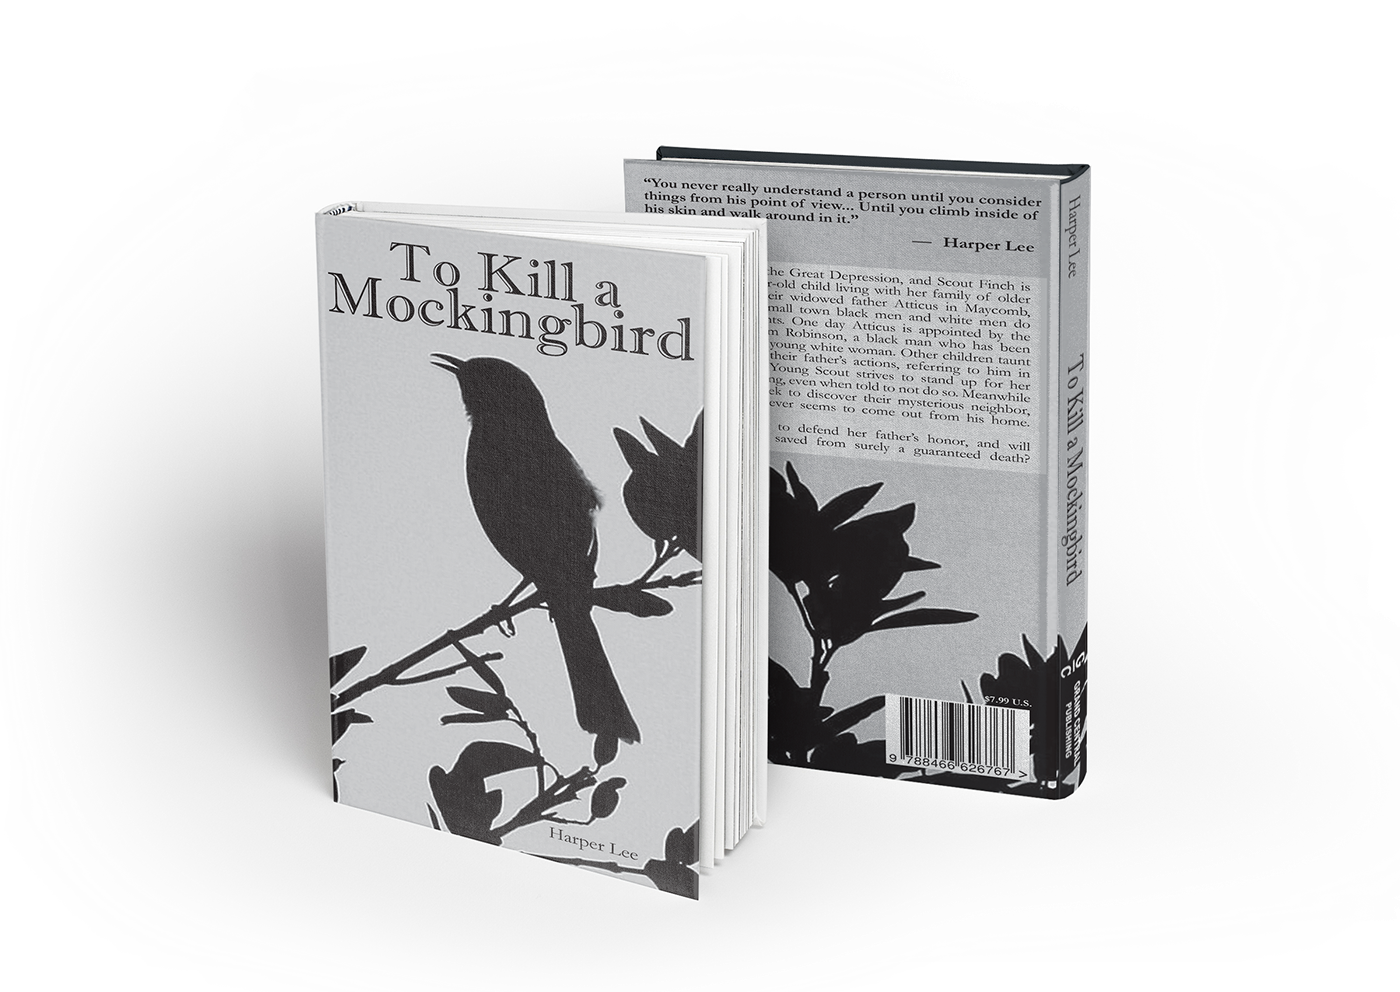 Dust Cover Design for "To Kill a Mockingbird."